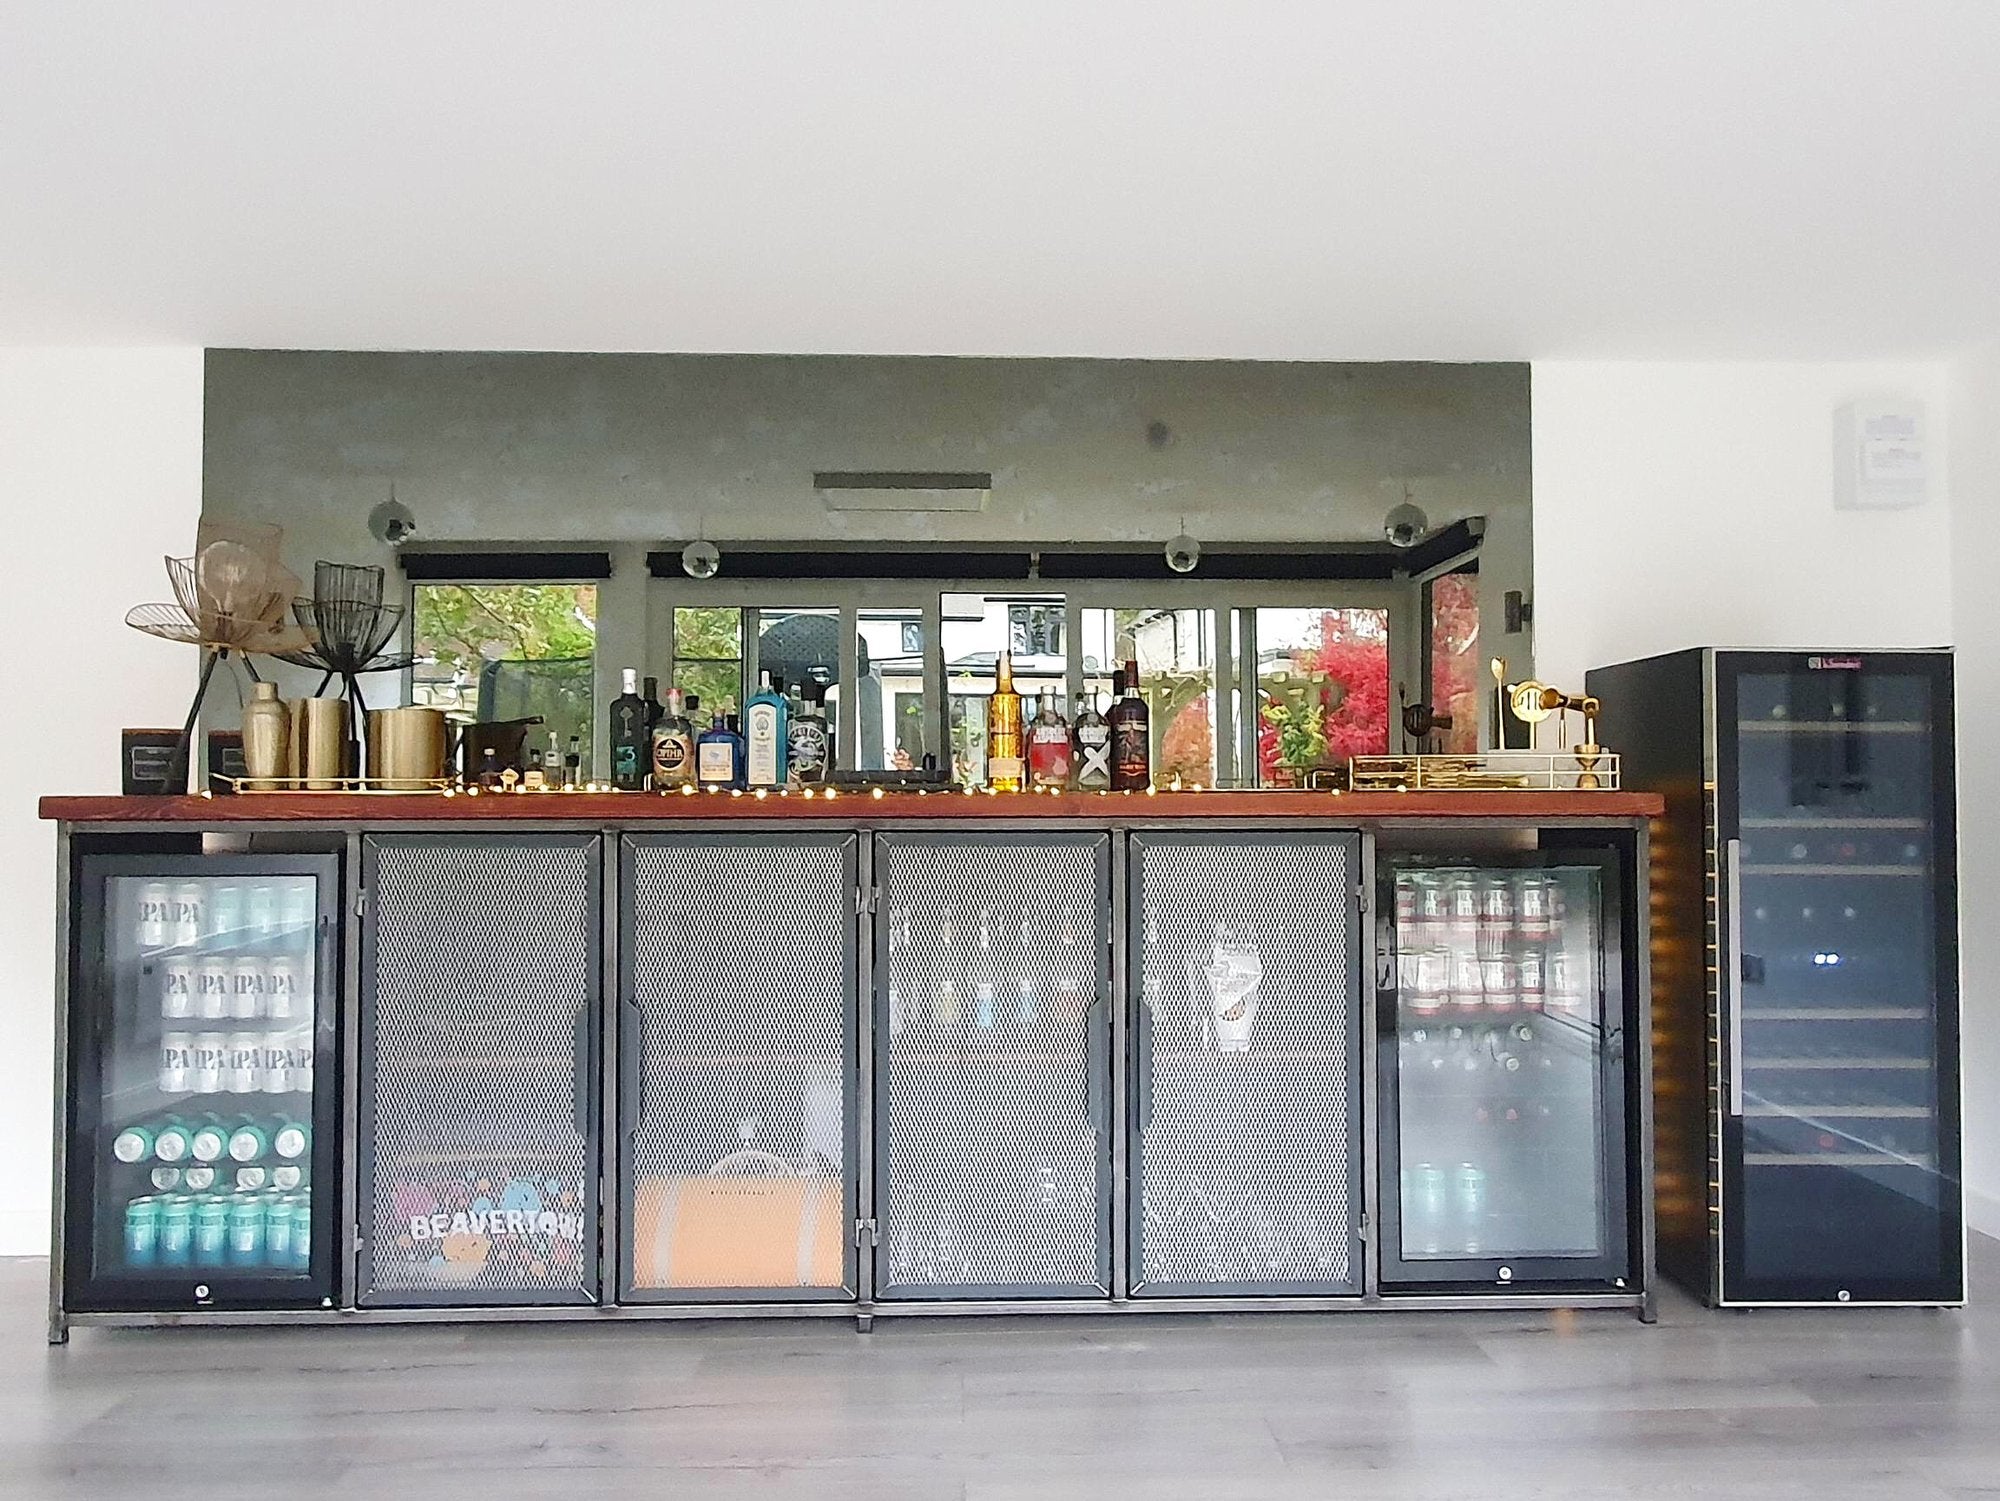 An impressive home bar setup that seamlessly blends an industrial theme and a beer drinks cooler